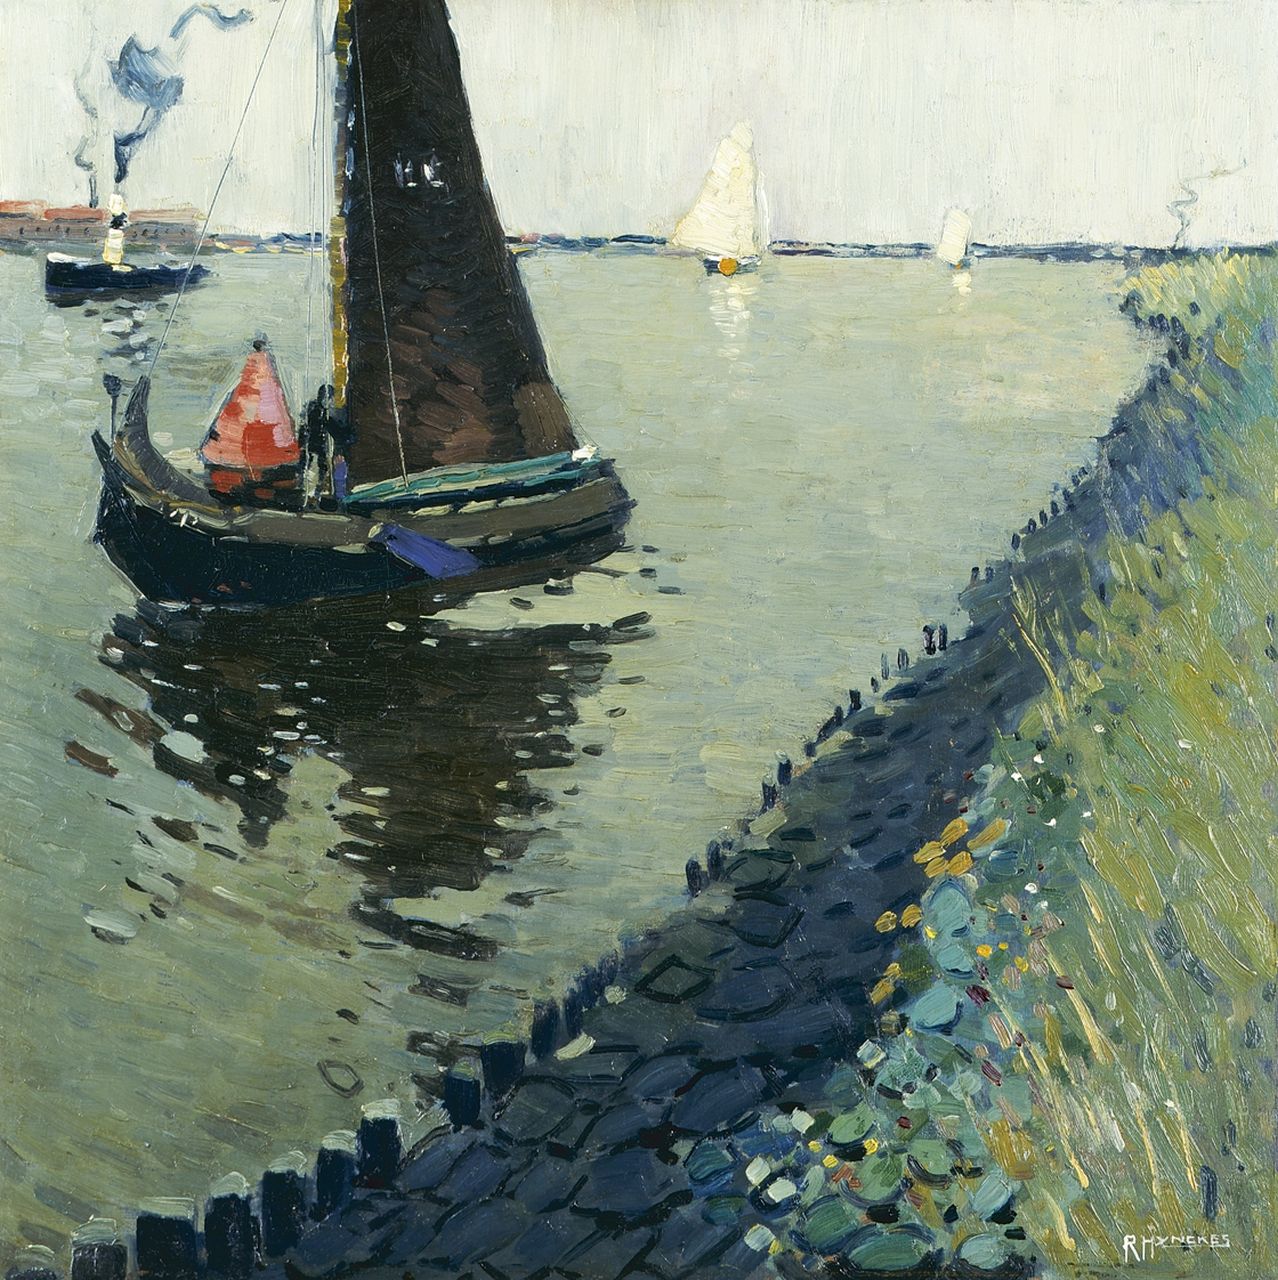 Hynckes R.  | Raoul Hynckes, A fishing boat on the Zuiderzee, 54.8 x 55.0 cm, signed l.r. and painted between 1912-1916